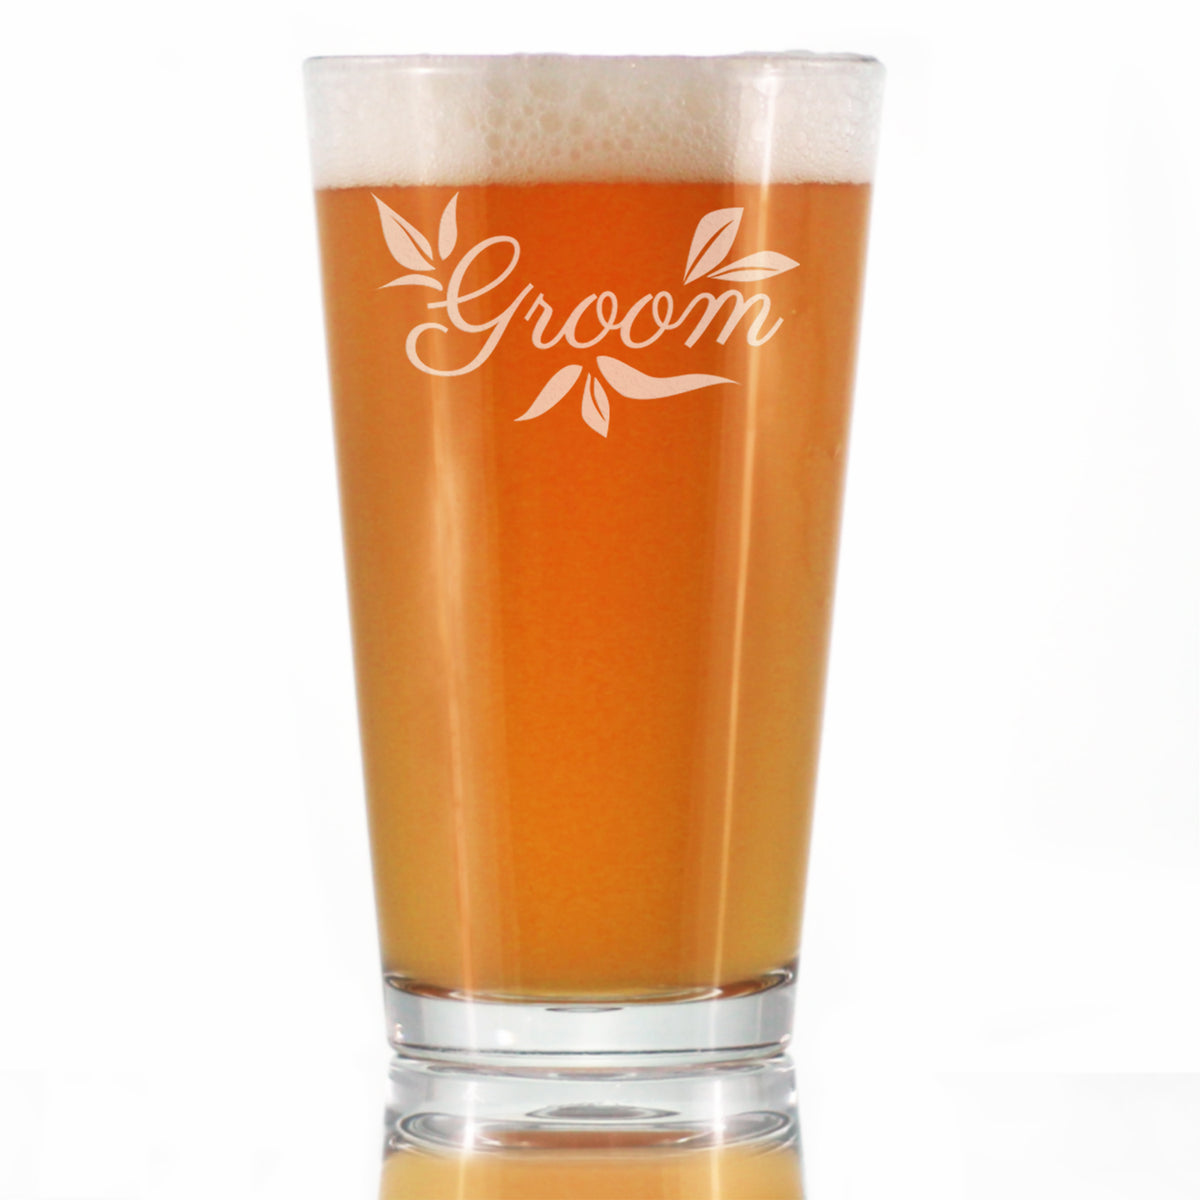 Groom Pint Glass - Unique Wedding Gift for Groom - Engraved Wedding Cup Gift